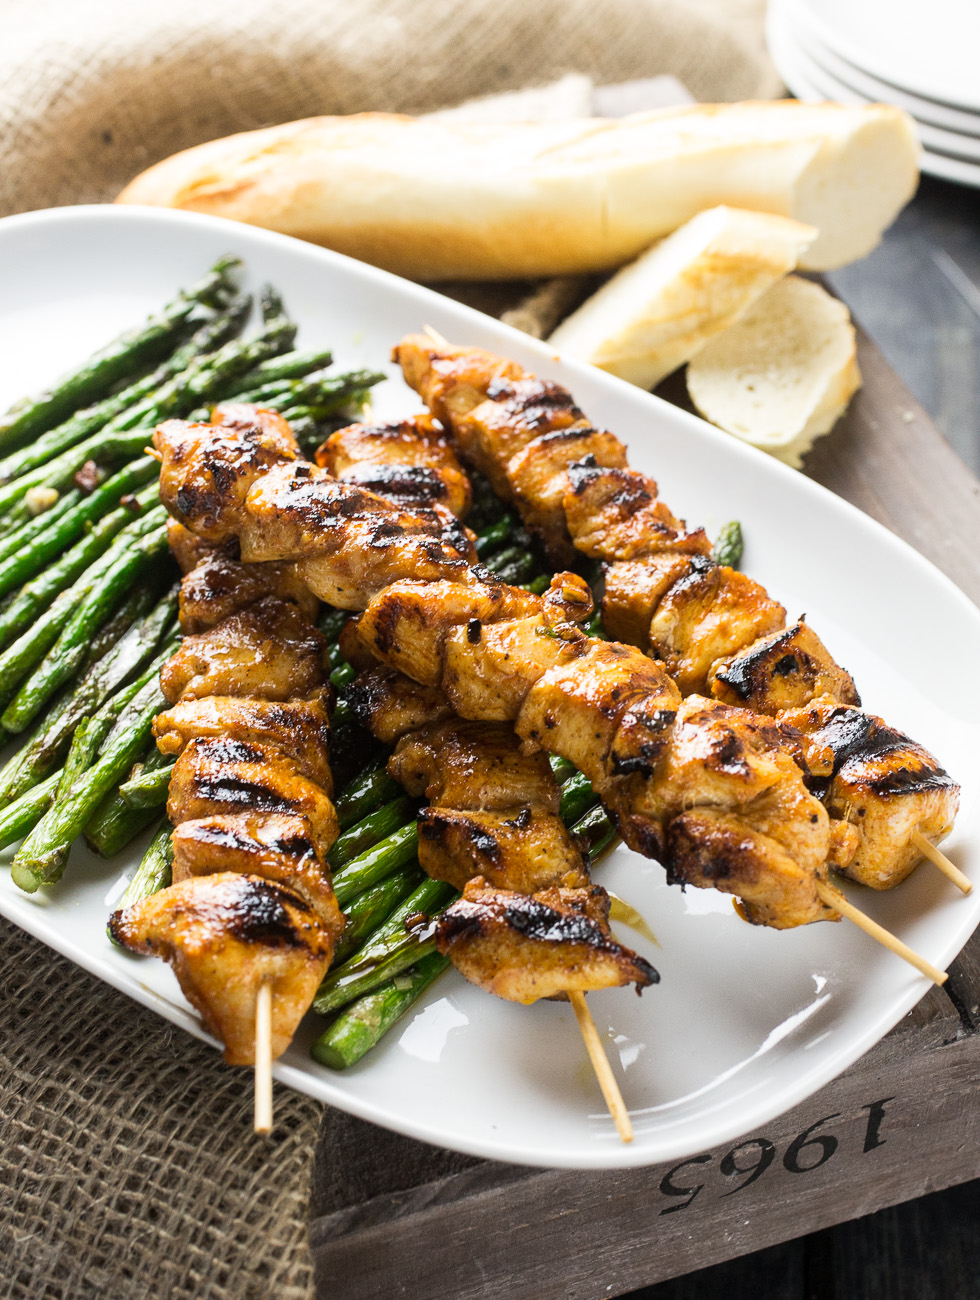 Spicy chicken skewers with roasted asparagus | thegirllovestoeat.com